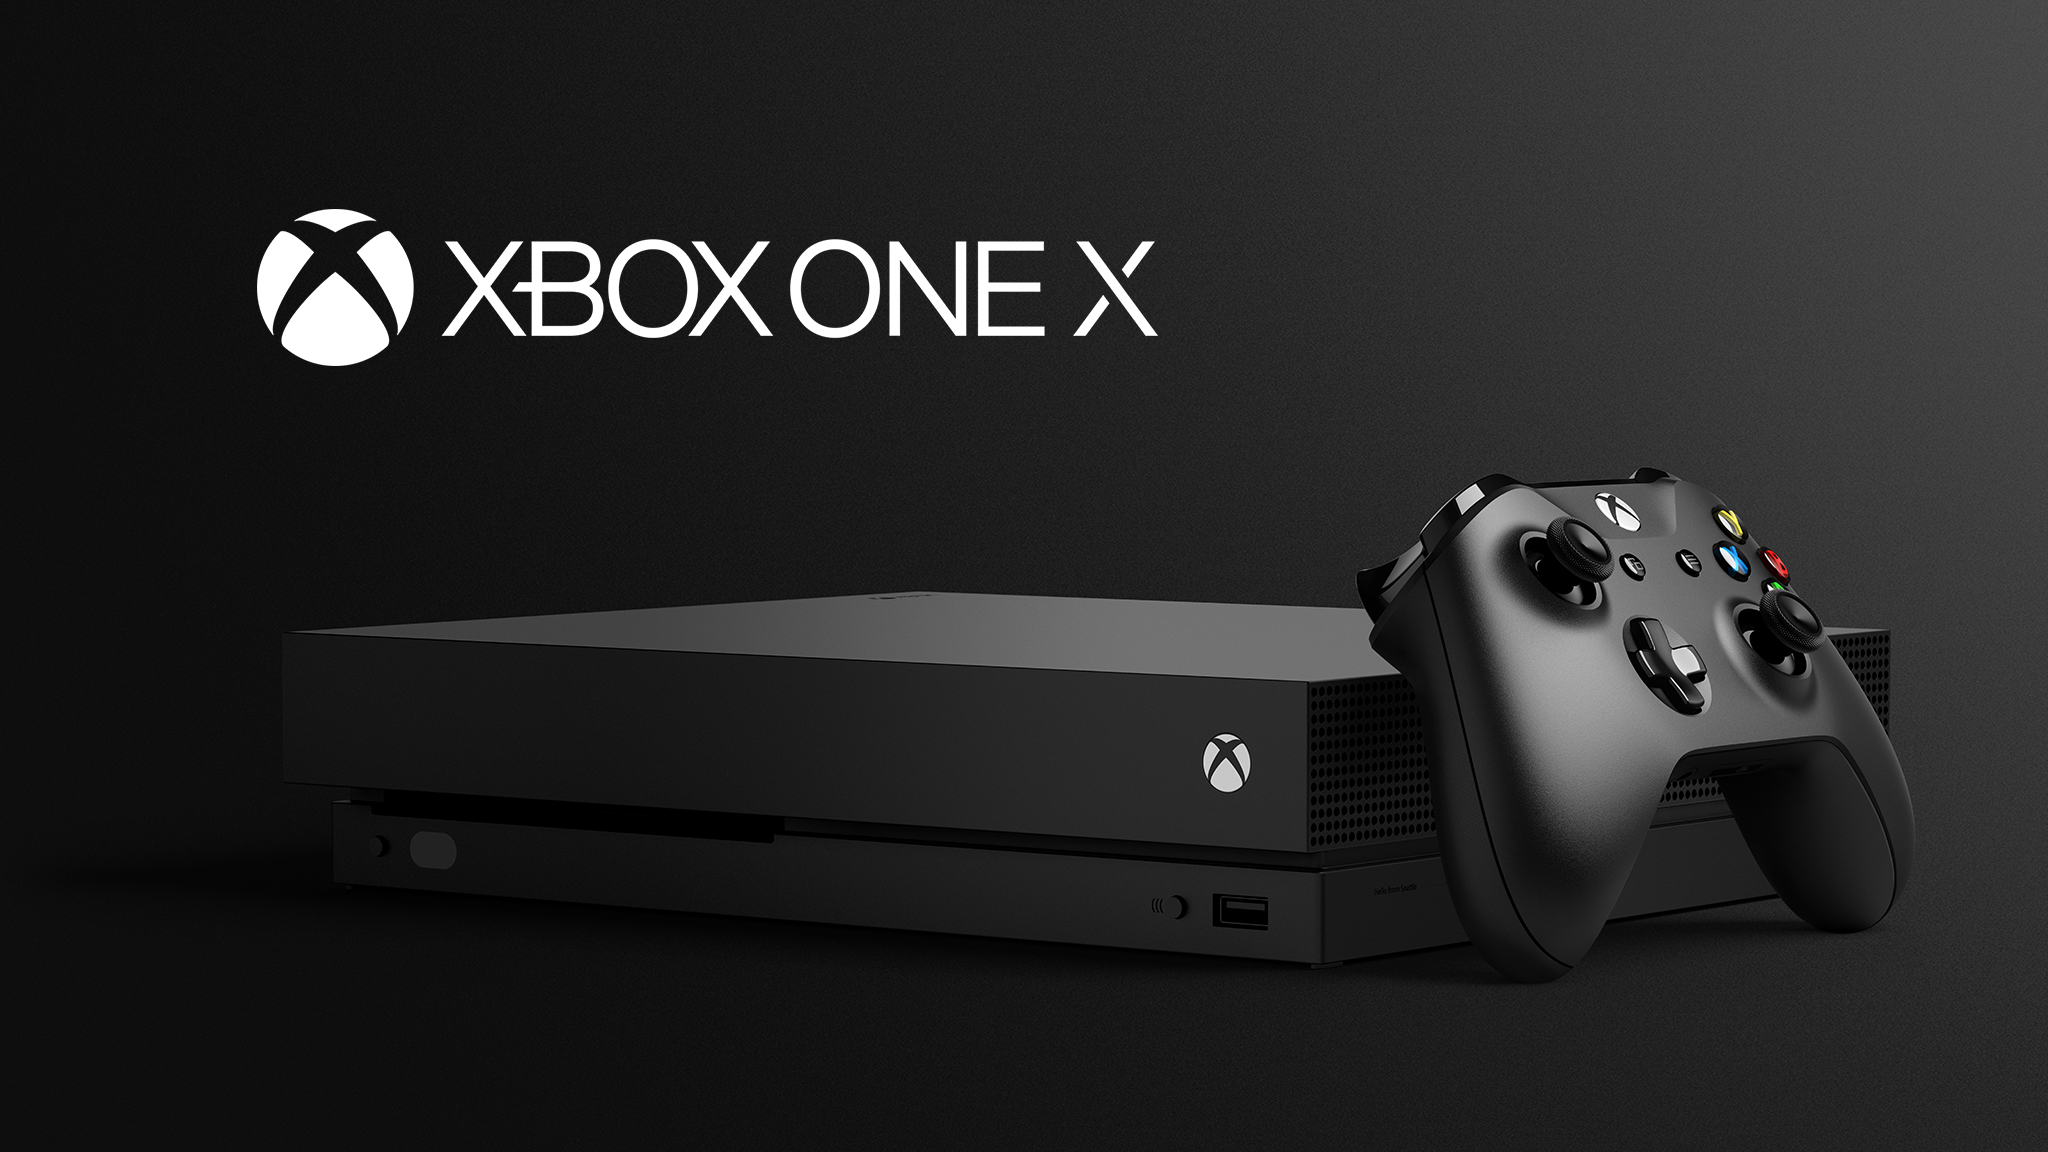 World's most powerful console, Xbox One X, launches